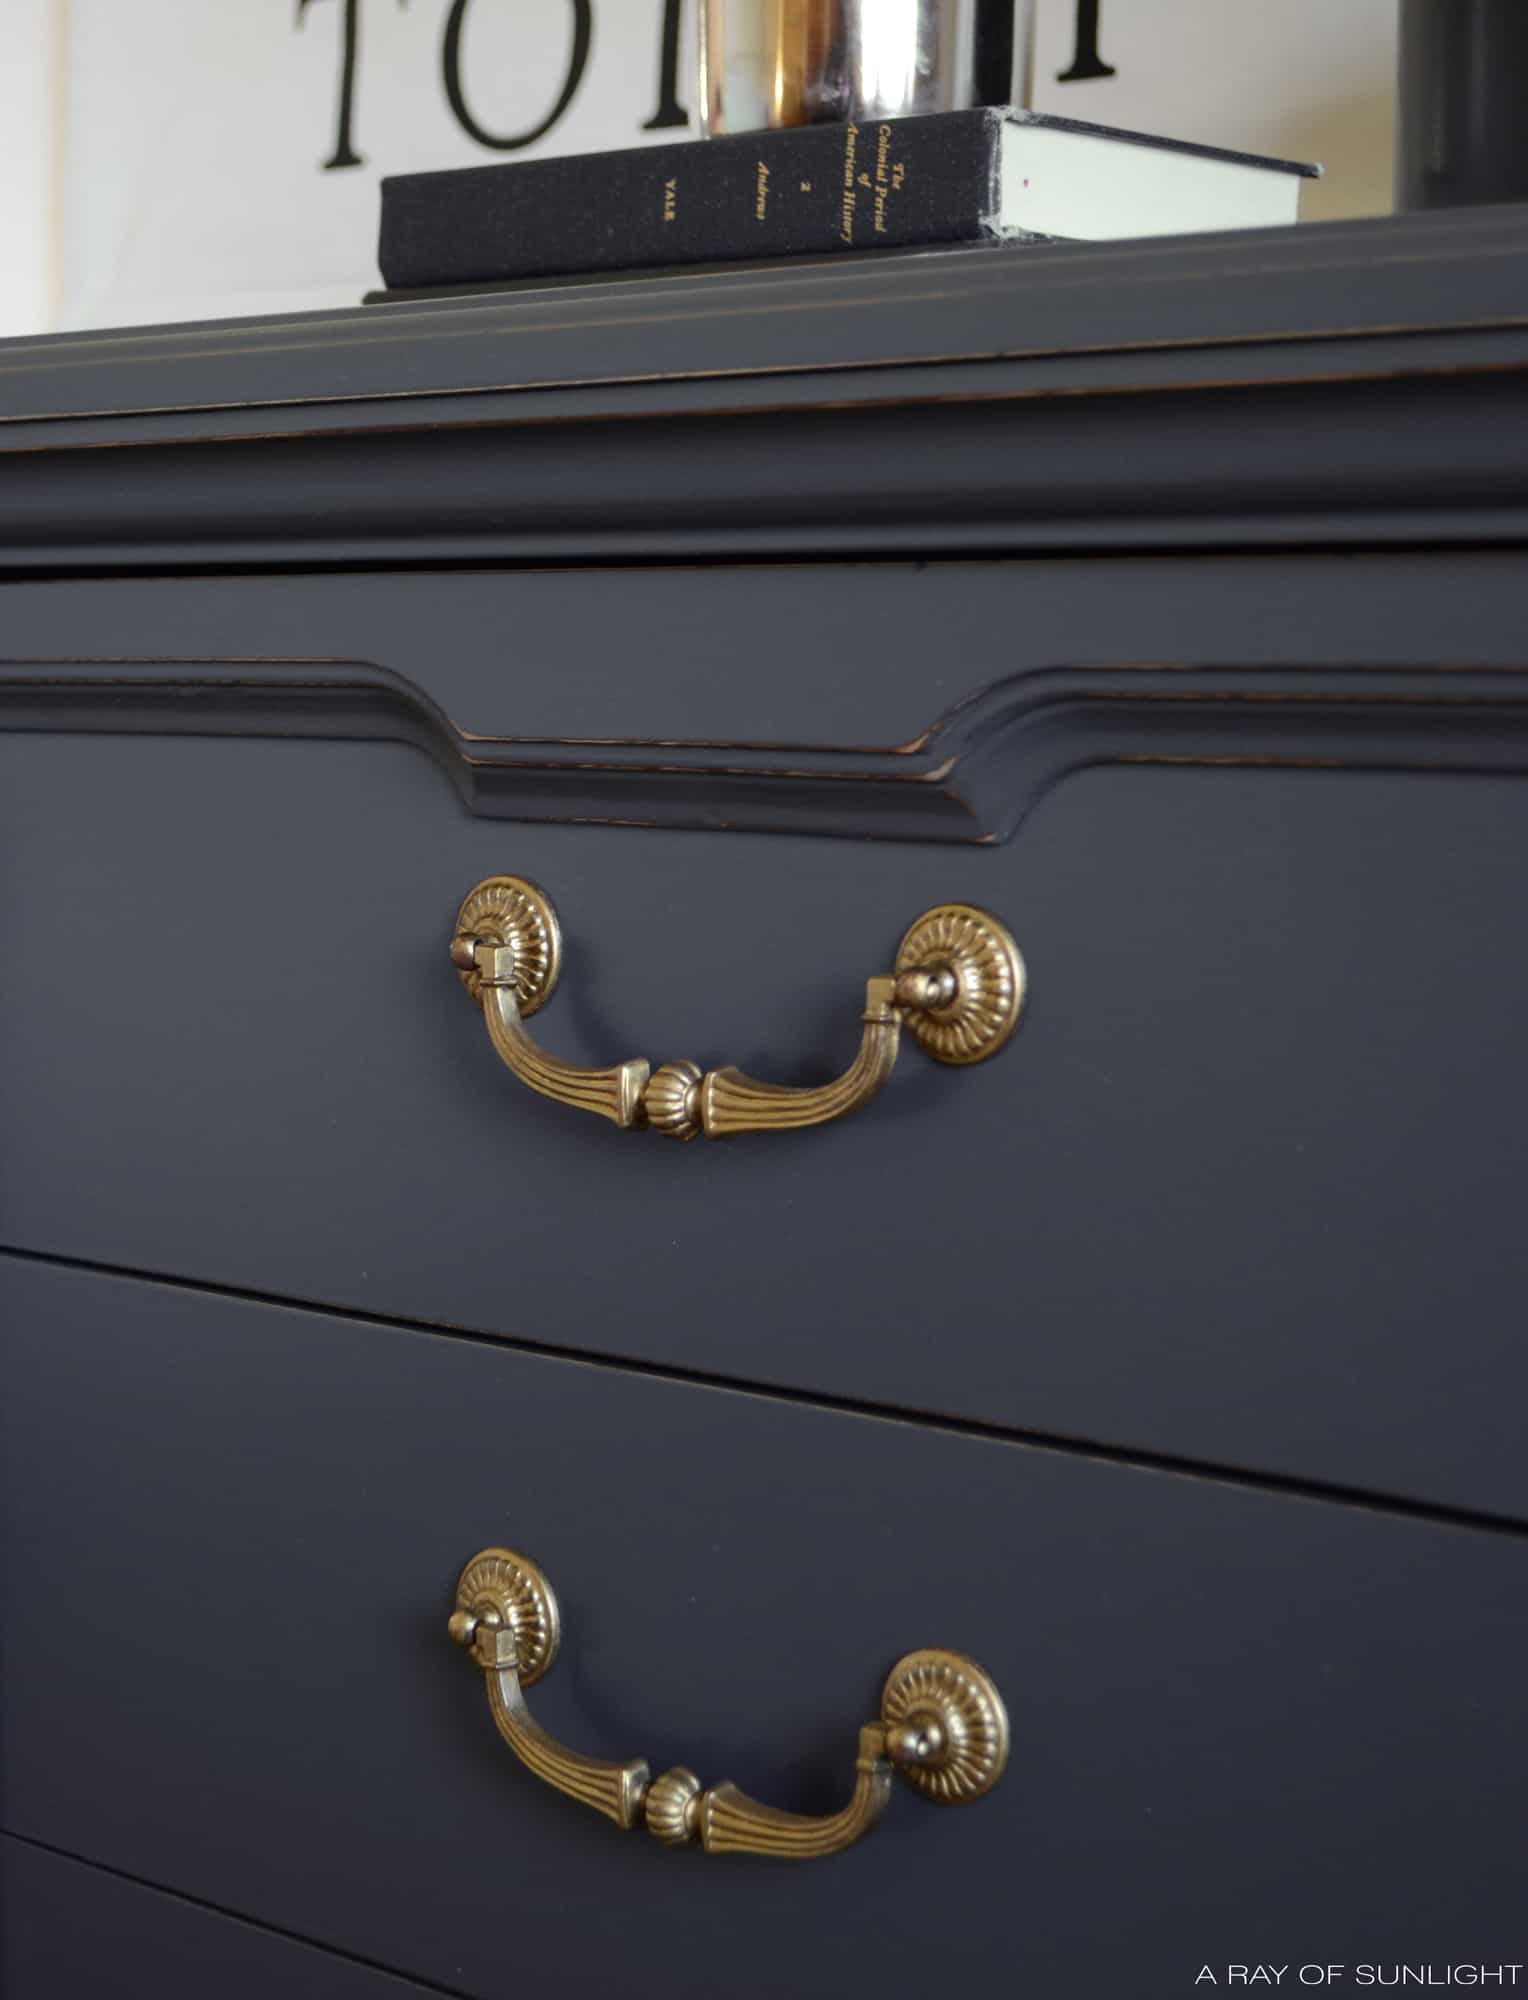 This vintage modern dresser got a complete makeover. From grey chalk paint, updated gold hardware, and freshly renewed drawers. I love how this deep grey finish is perfect for any home decor style. From farmhouse, to modern, to eclectic, and more! #farmhousedecor #furnituremakeover #furnituretransformation #paintedfurniture #chalkpaintedfurniture #modernfarmhouse #mcmfurniture #neutralfurniture #howtopaintfurniture 